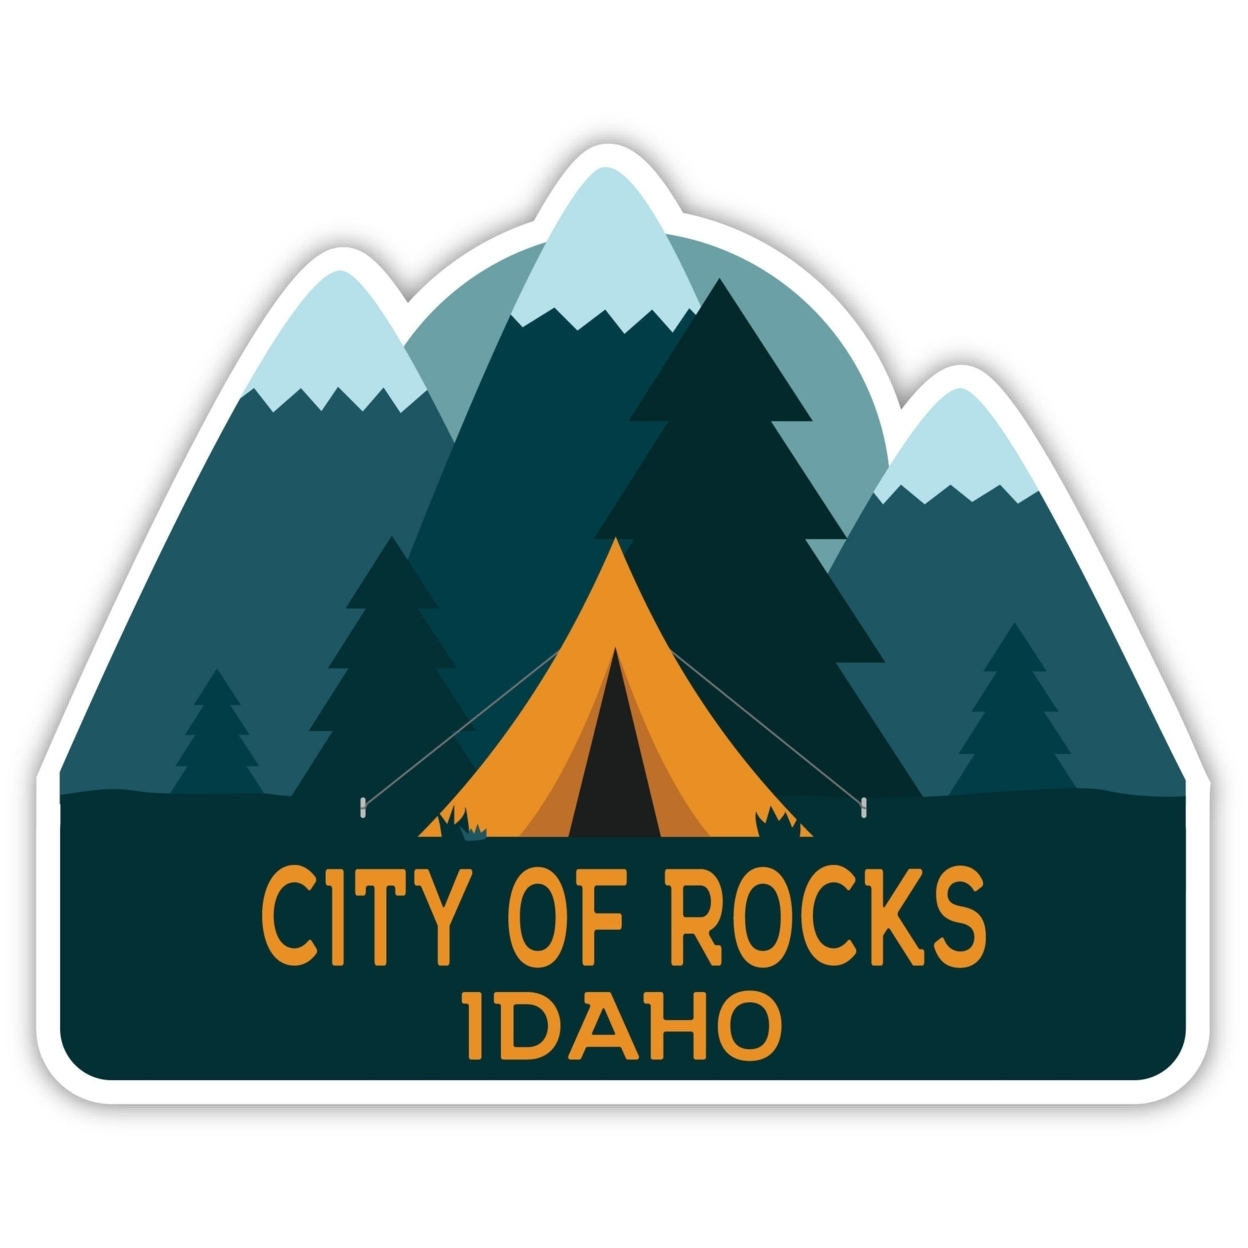 City Of Rocks Idaho Souvenir Decorative Stickers (Choose Theme And Size) - Single Unit, 6-Inch, Great Outdoors